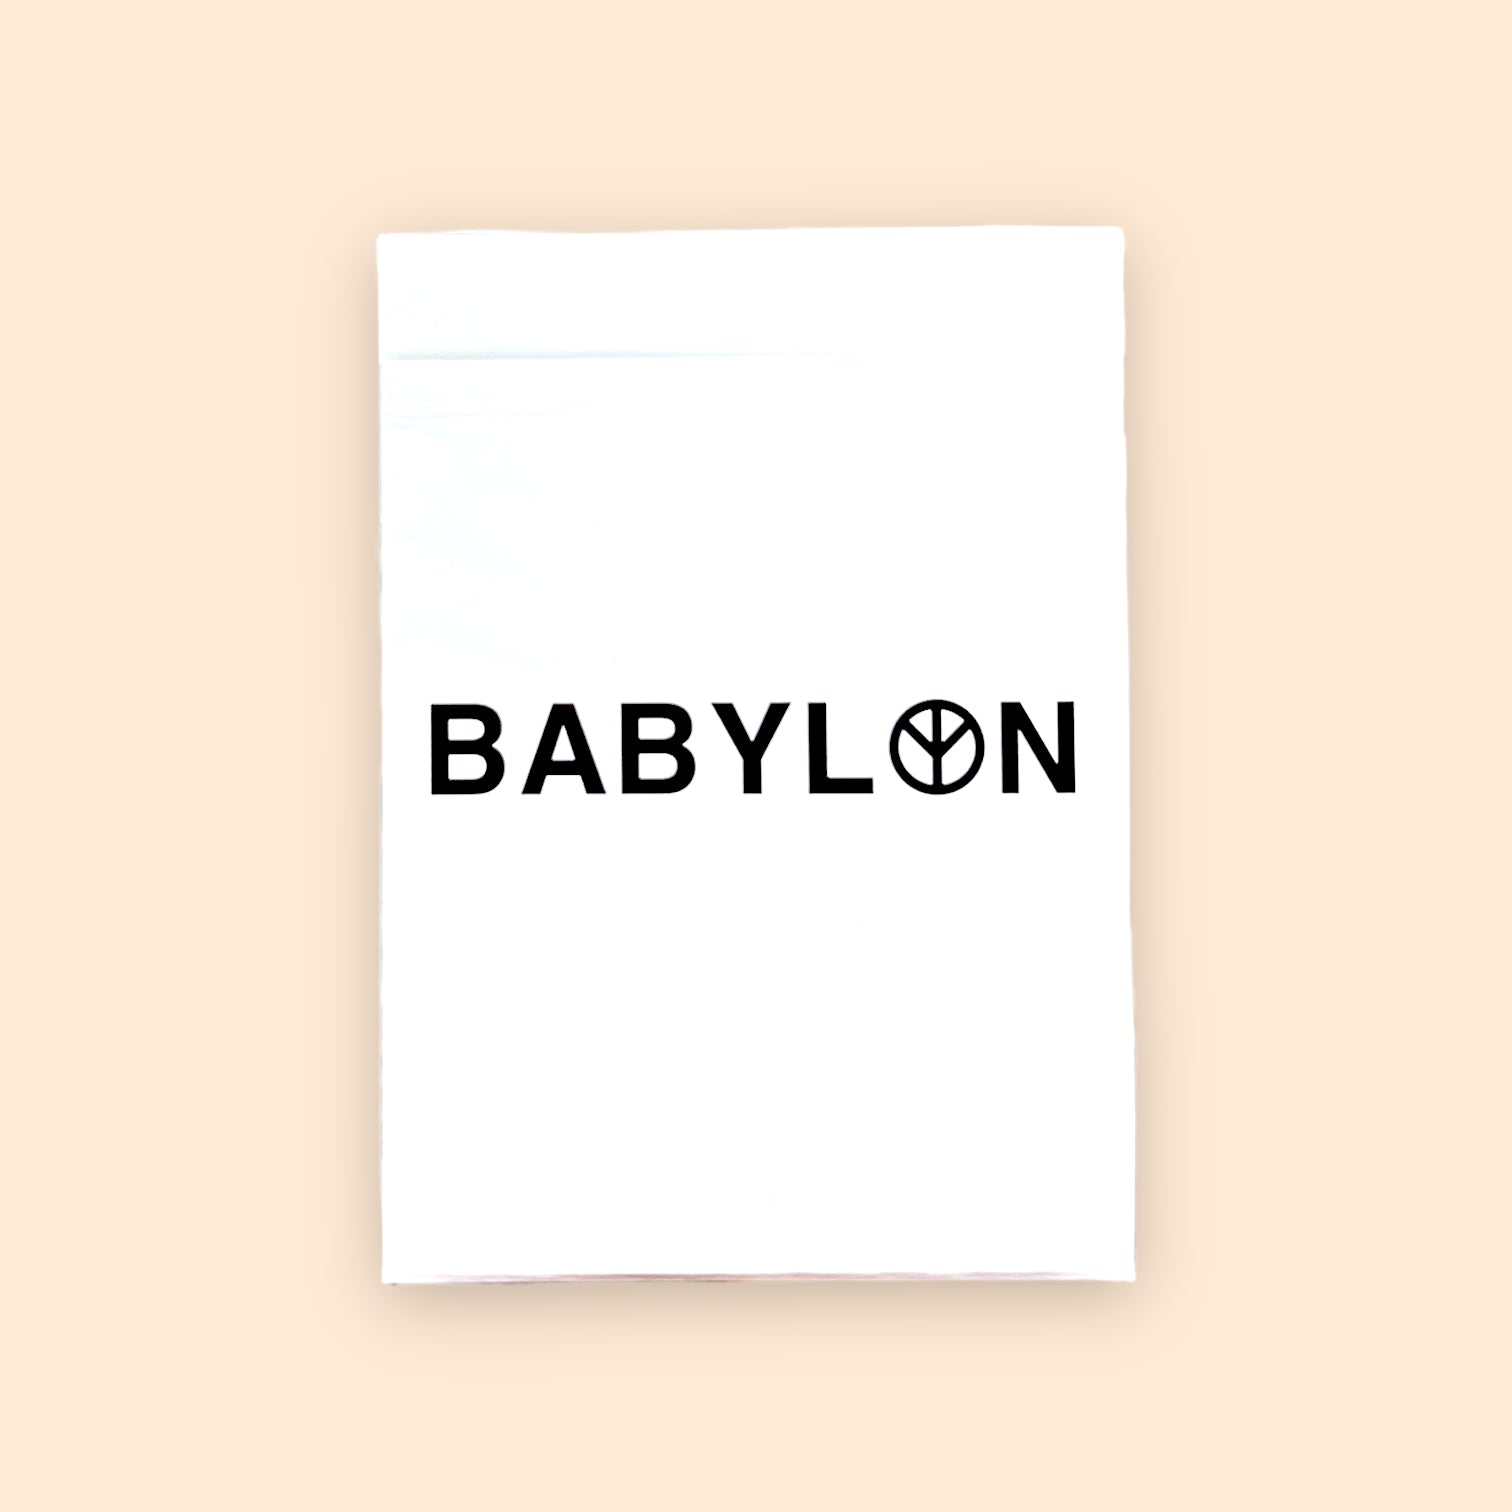 Fontaine Babylon Playing Cards Collectors Case playing cards